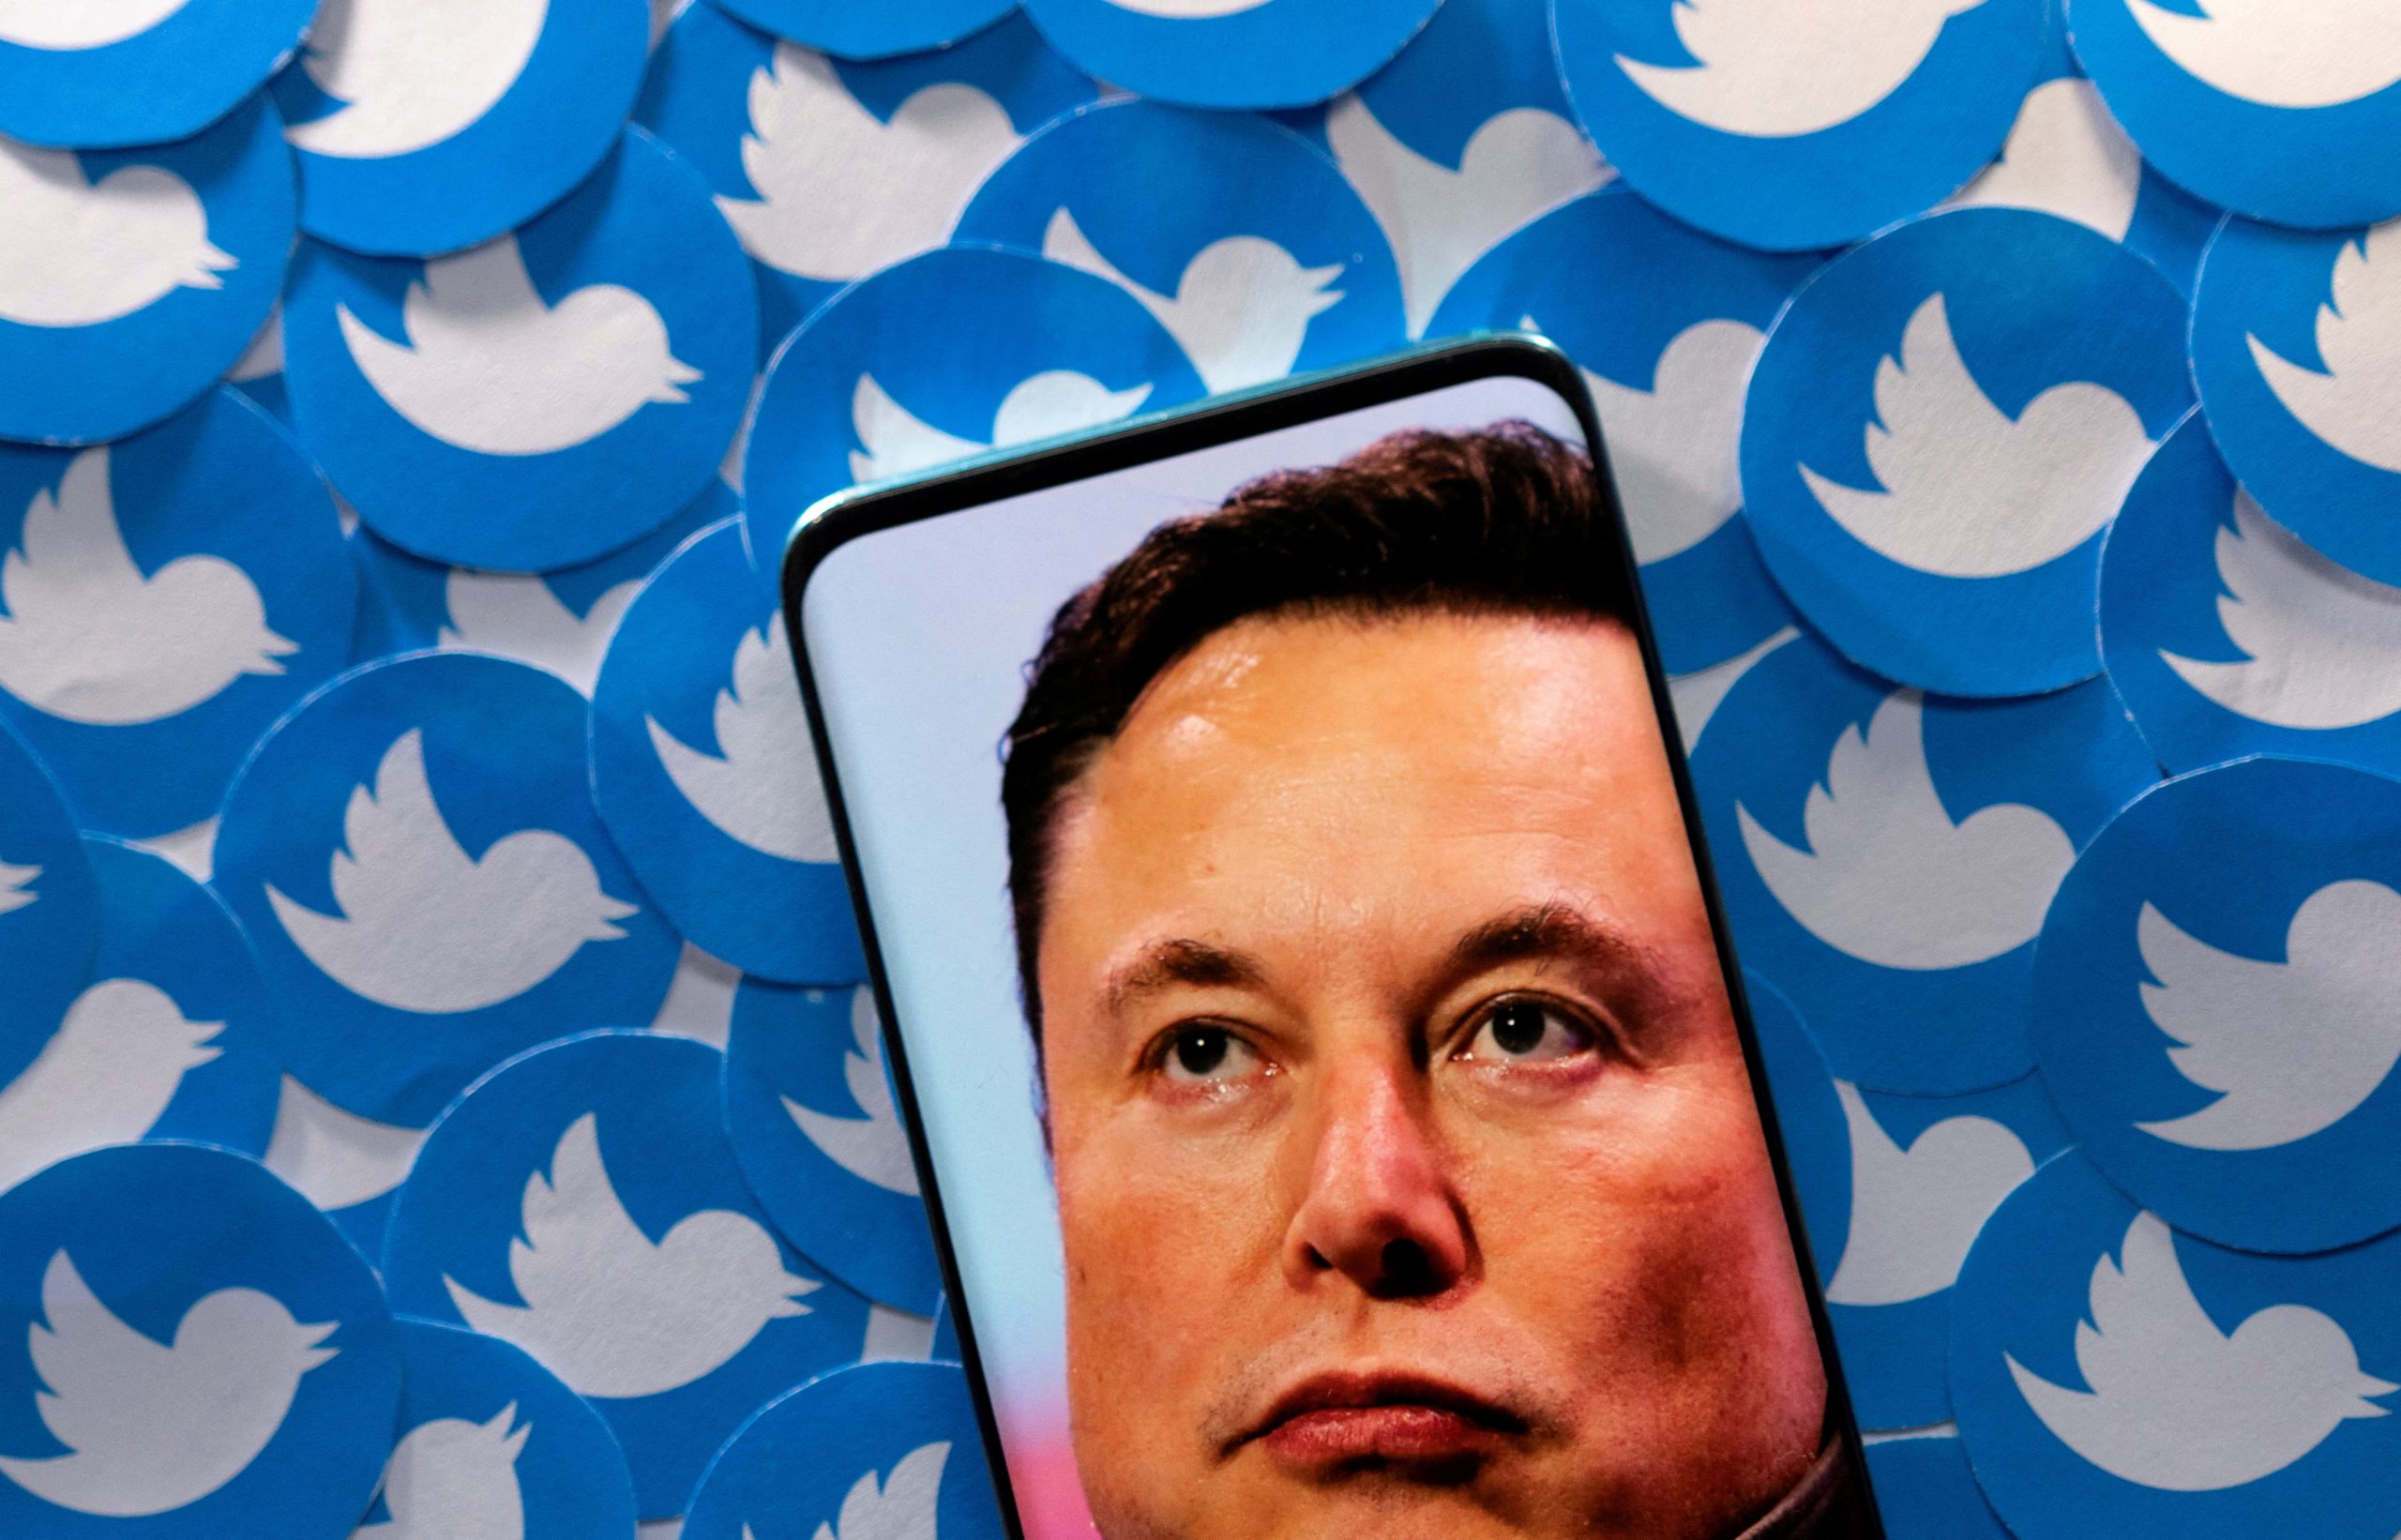 Twitter set to lay off nearly three-quarters of its staff in 2023 when Elon Musk takes over